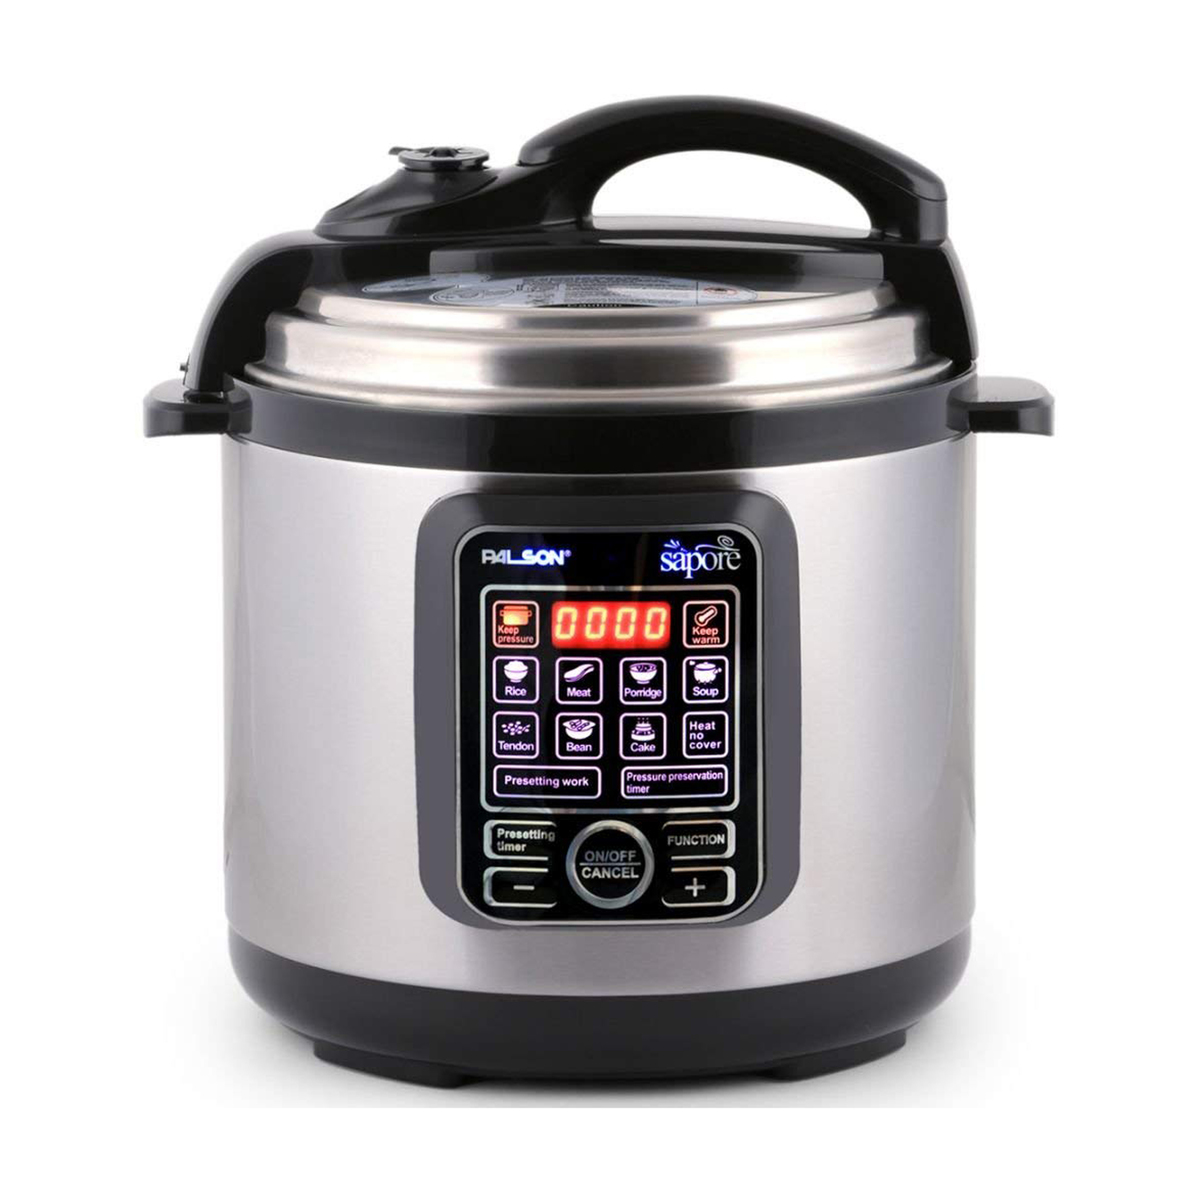 Palson Electric Pressure Cooker 30622 Sapore 6Ltr | Electric Cookers ...